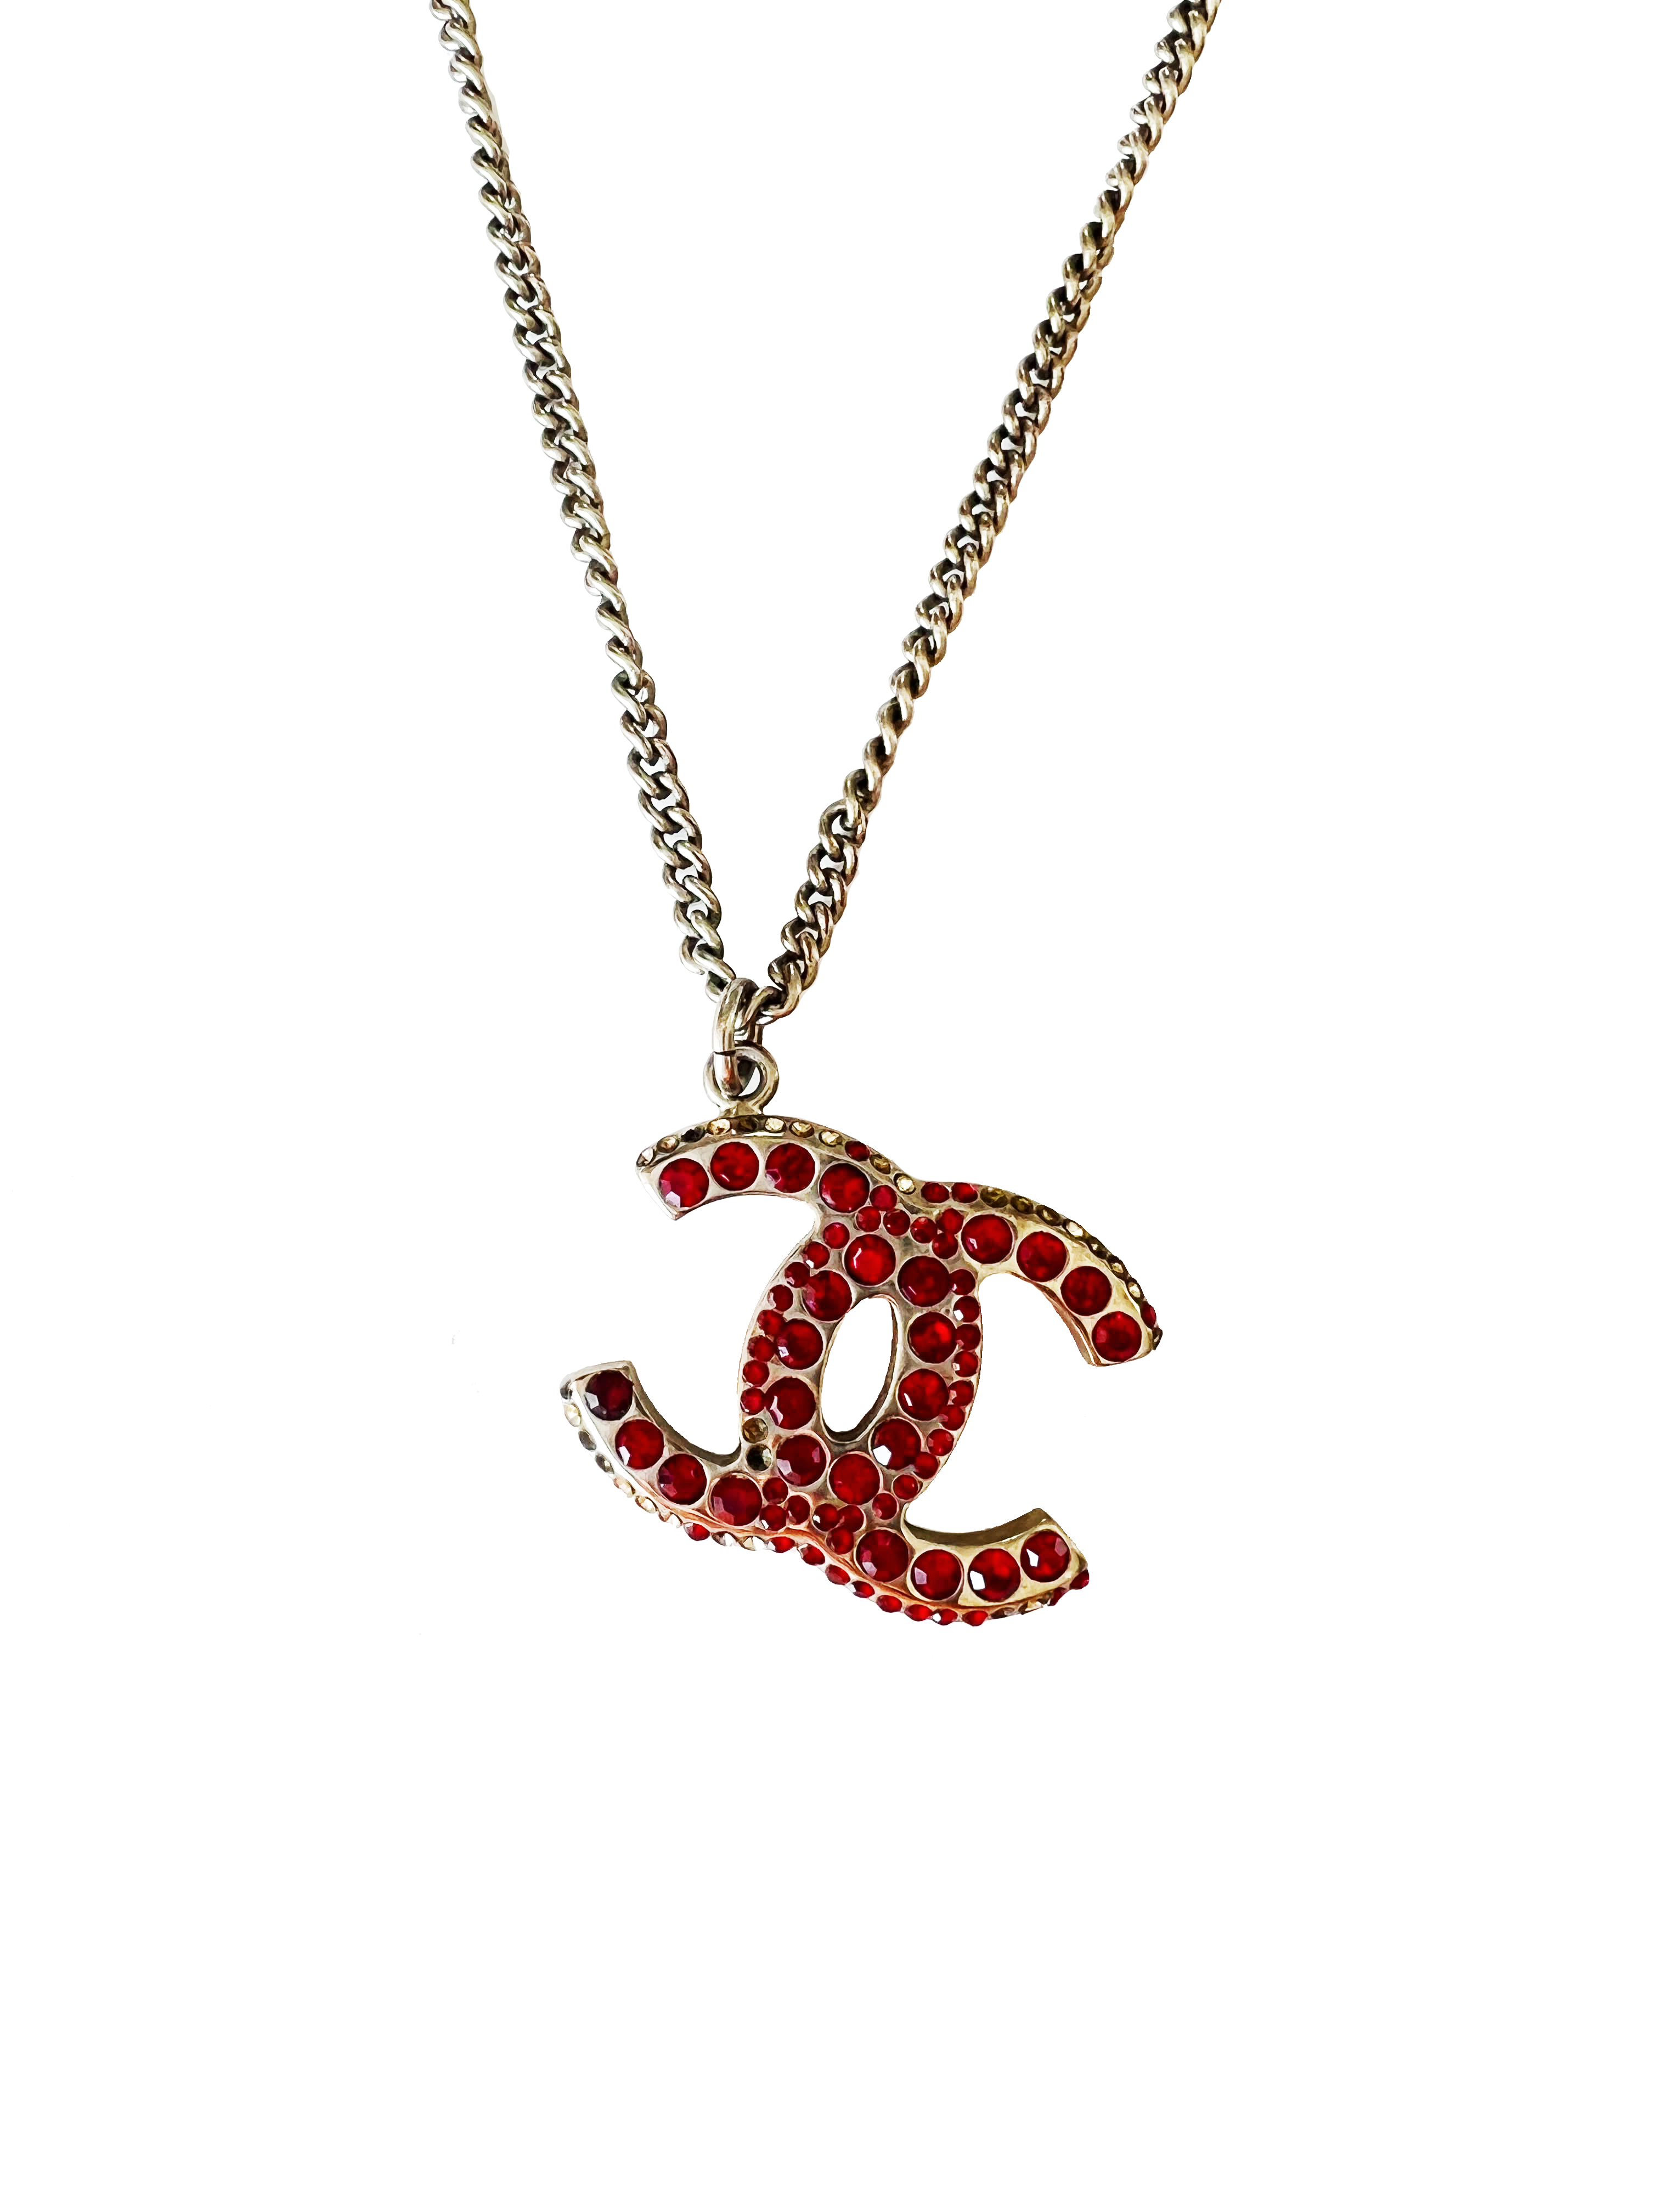 Vintage Chanel Cc Turnlock Curb Chain Necklace